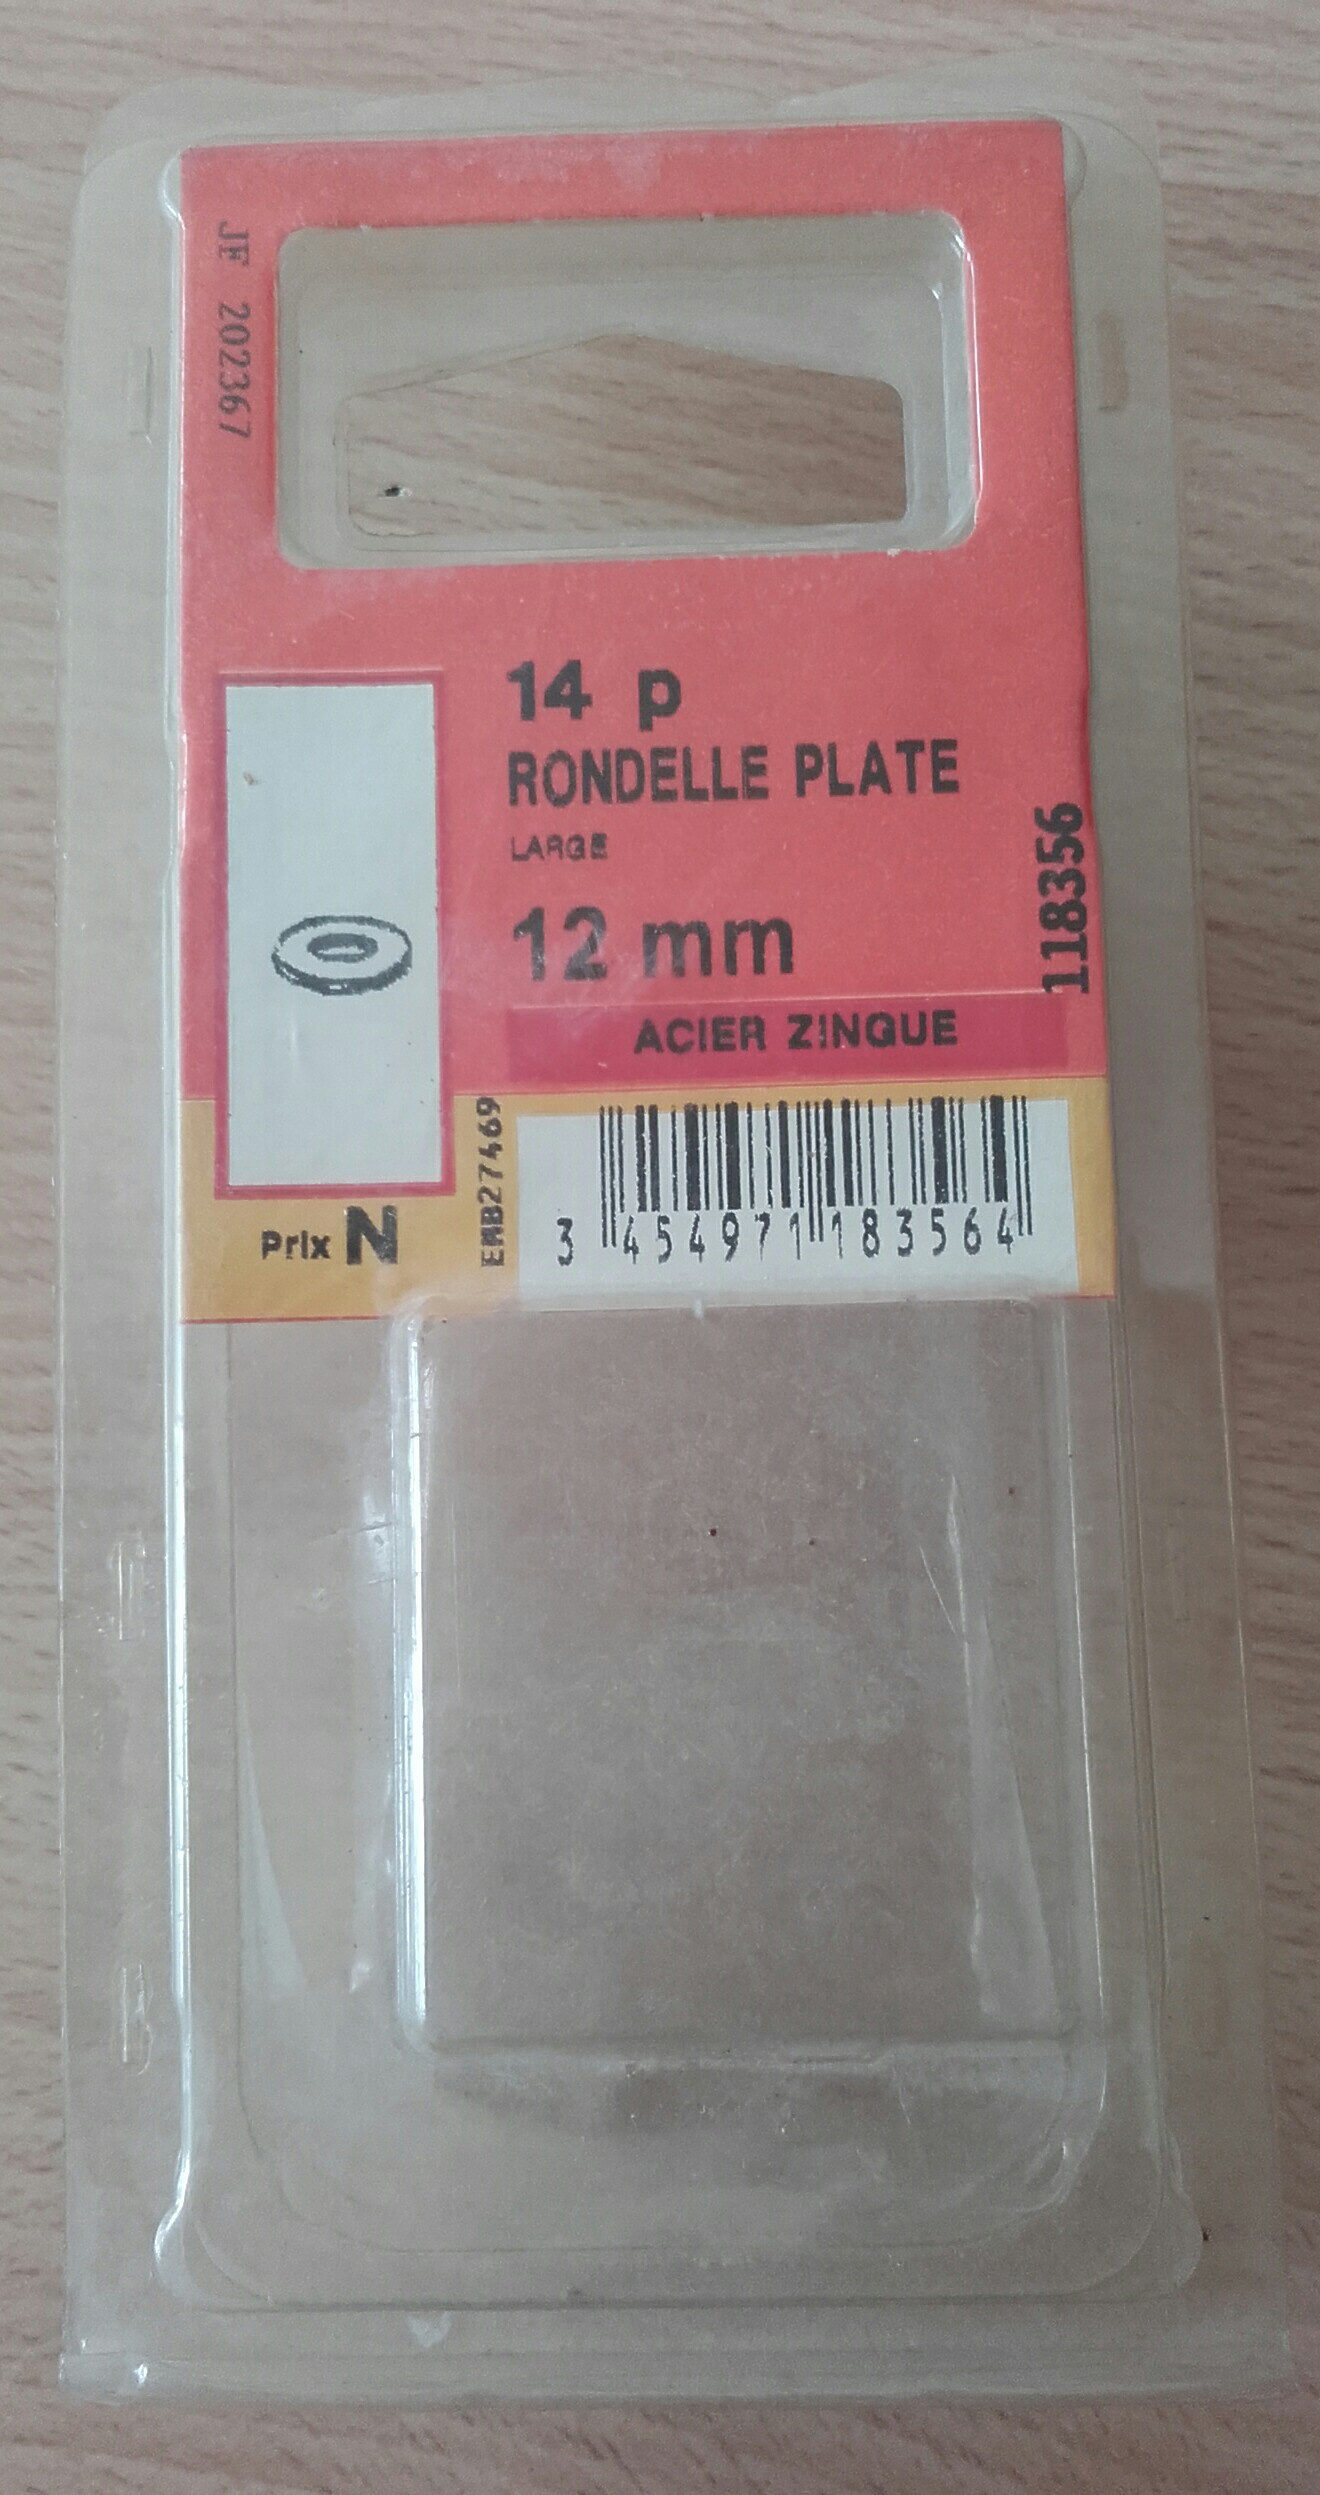 Rondelle plate large 12mm - Product - fr